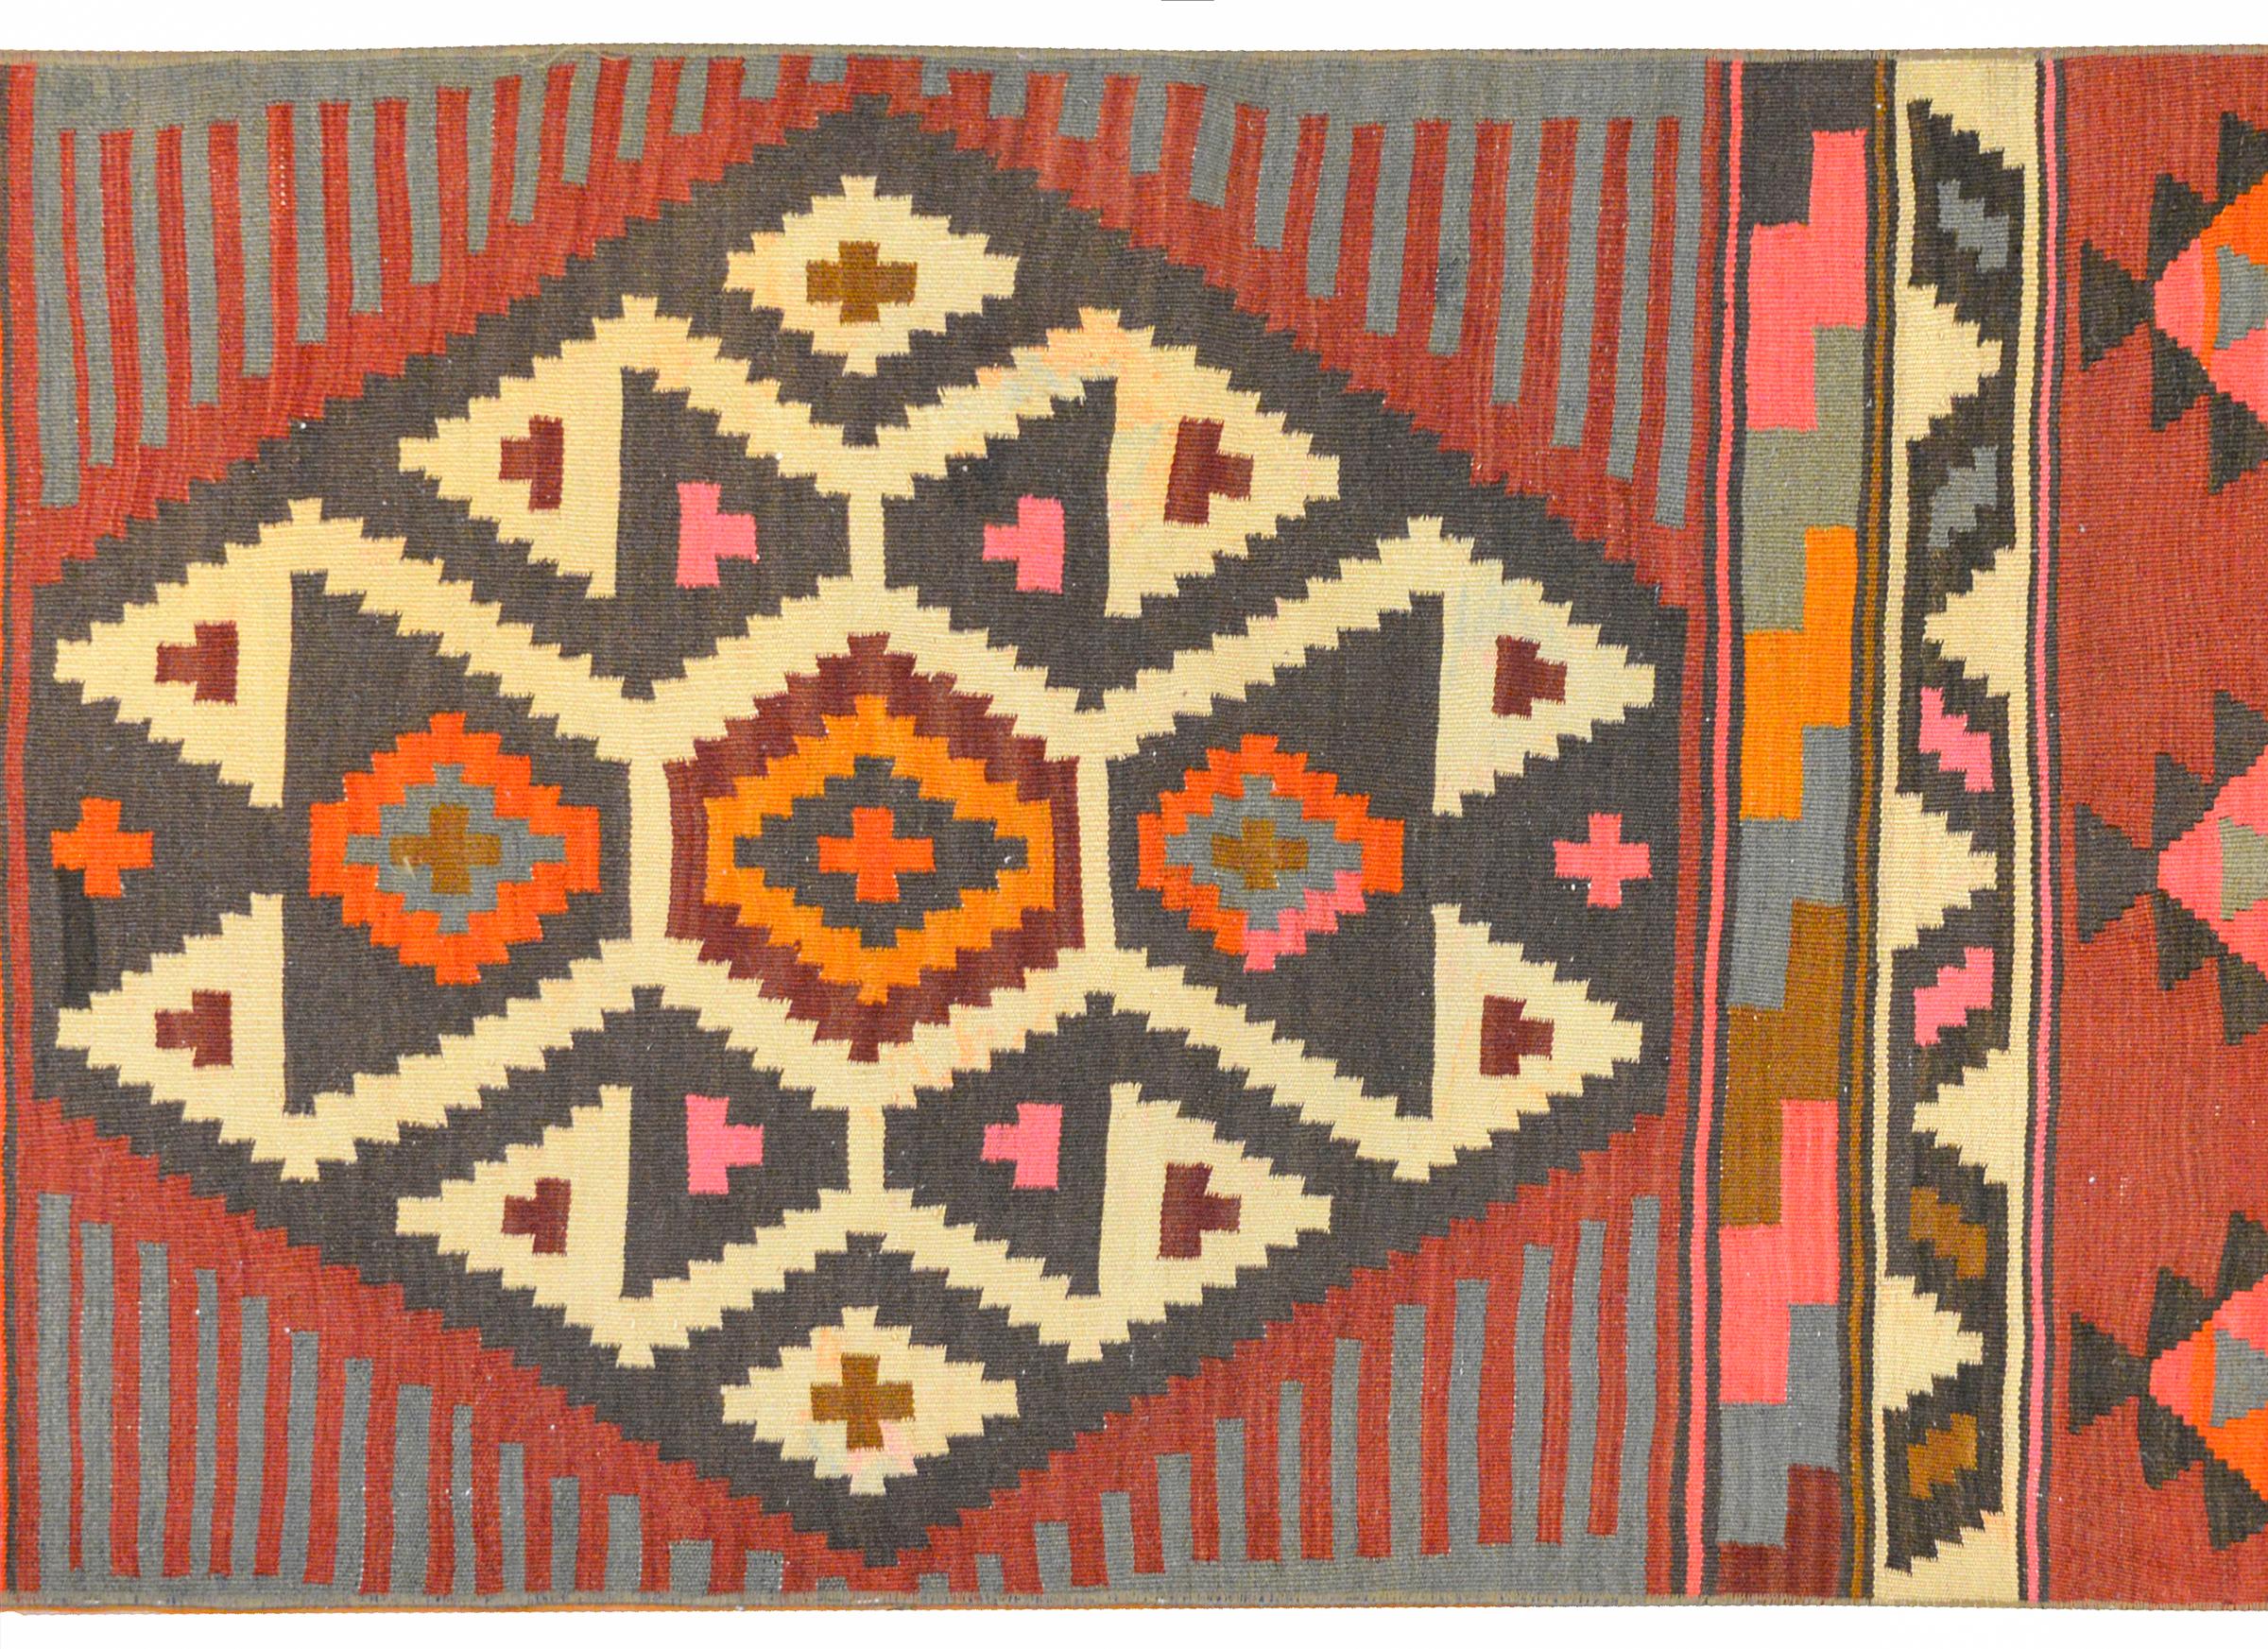 An early 20th century Azerbaijani Kilim runner with with a bold geometric pattern woven in crimson, orange, gold, gray, pink, white and black vegetable dyed wool.